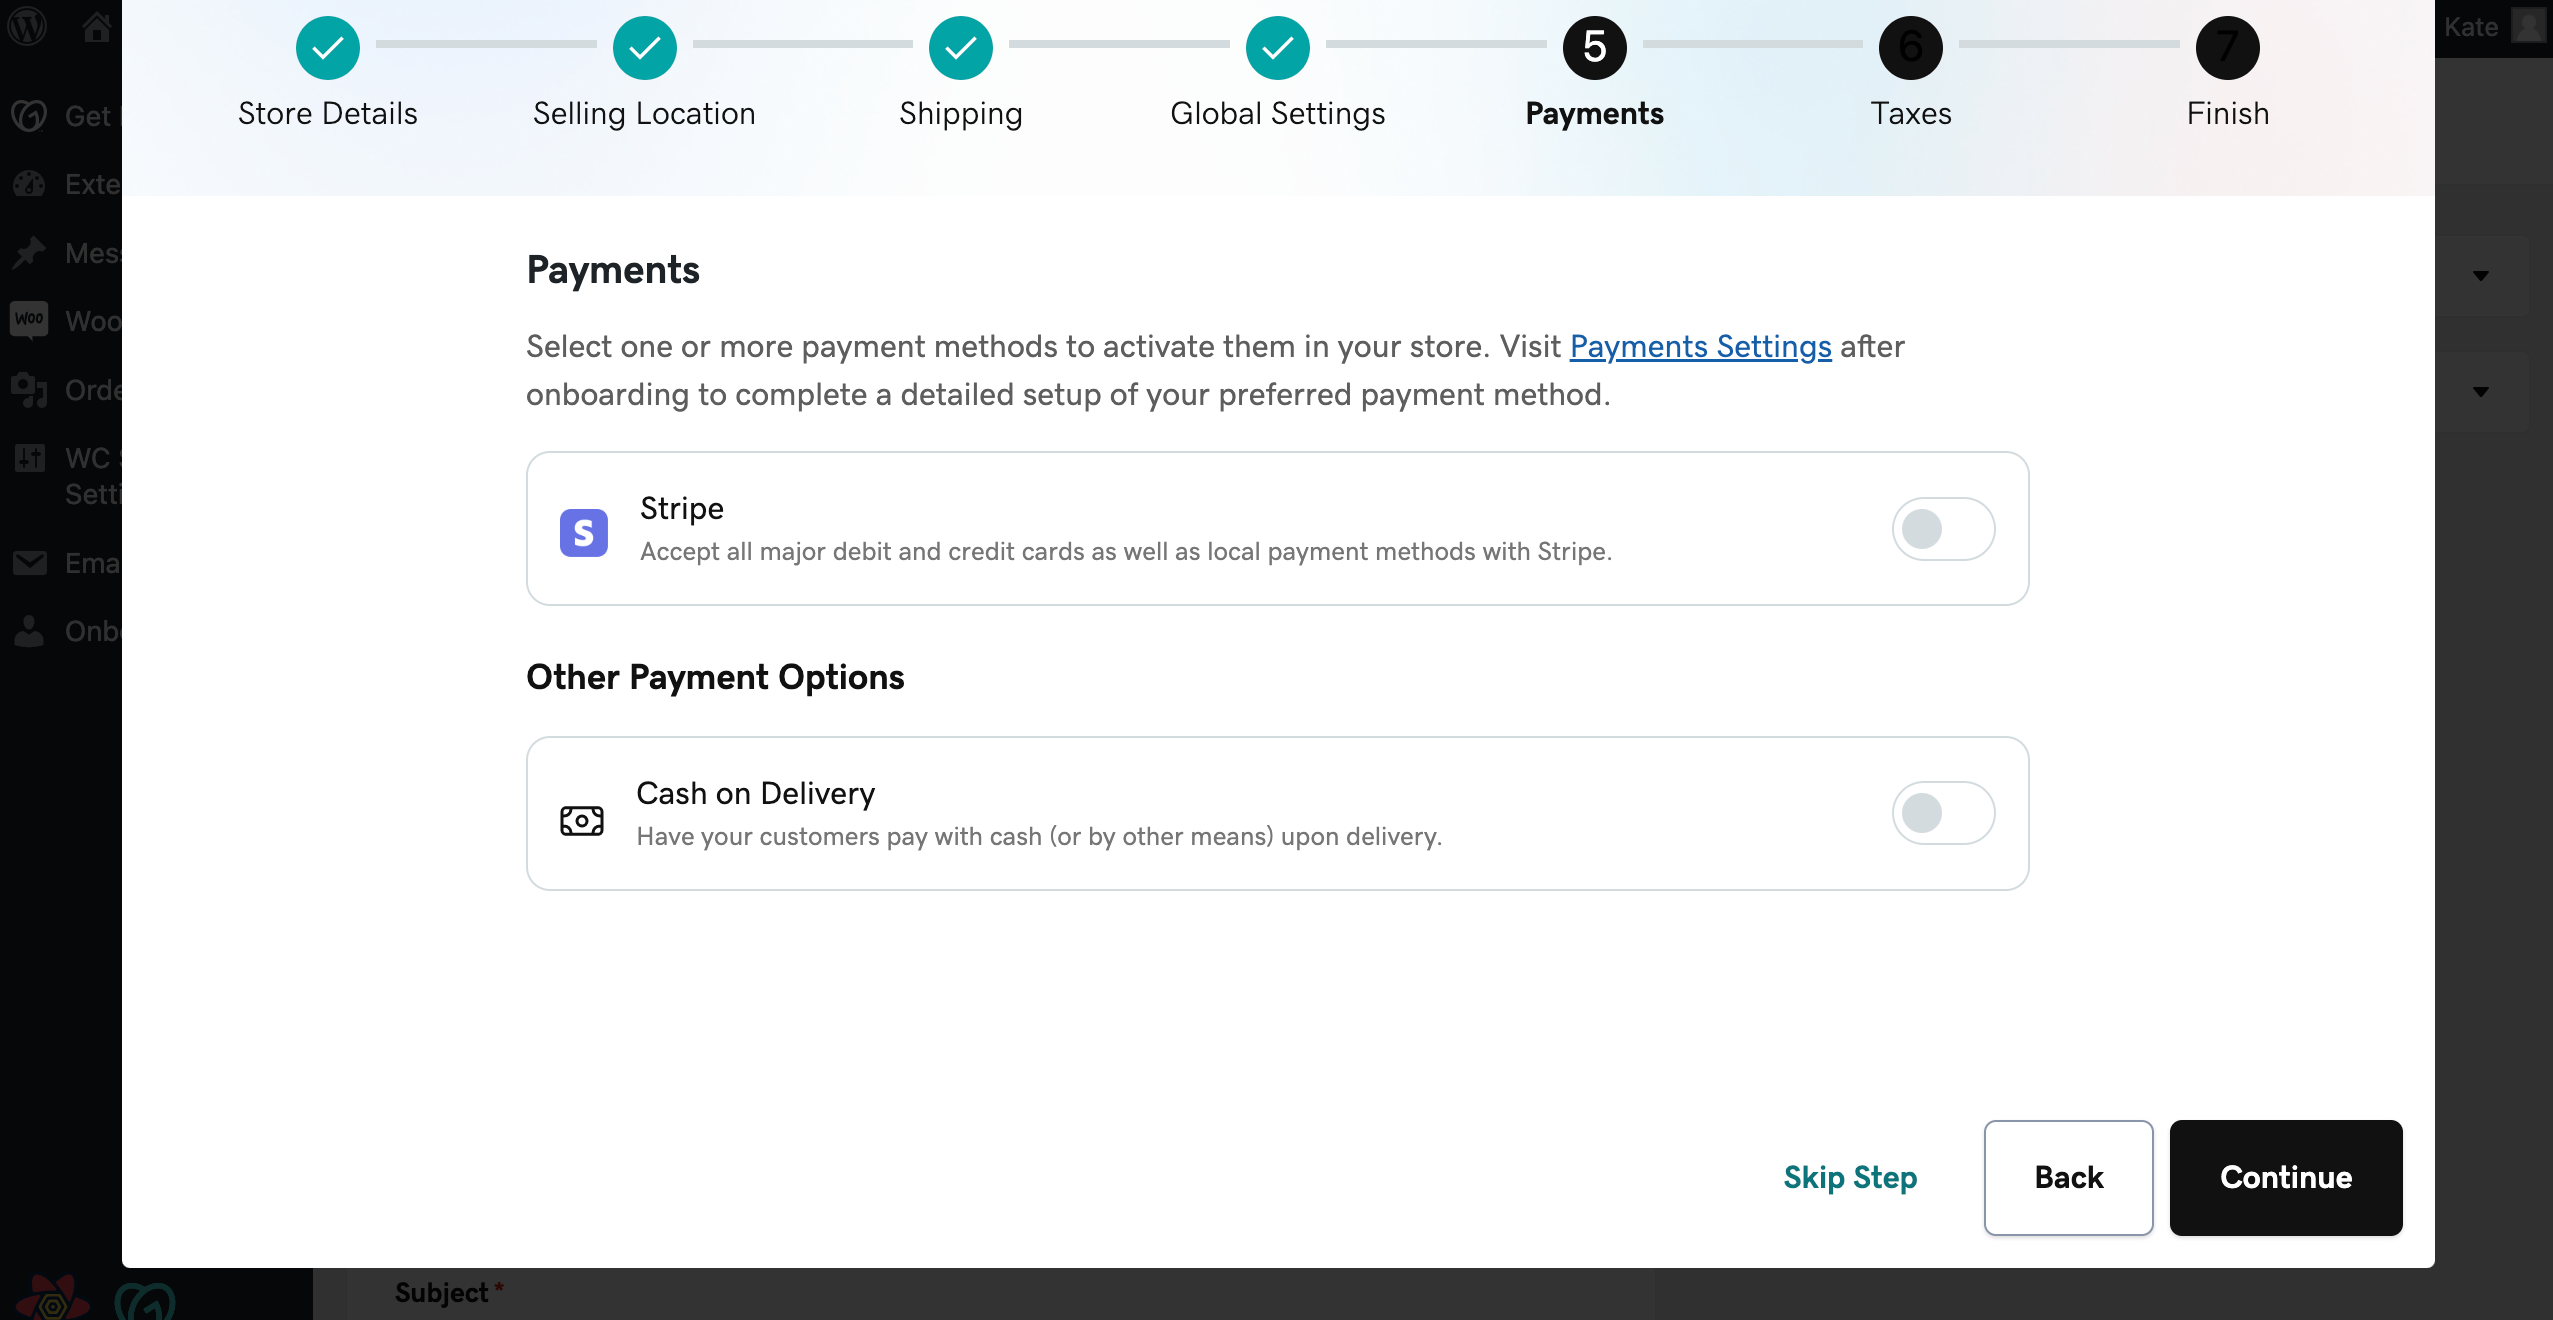 Two fields that allow merchants activate the Stripe plugin or the Cash on Delivery payment method during the onboarding wizard